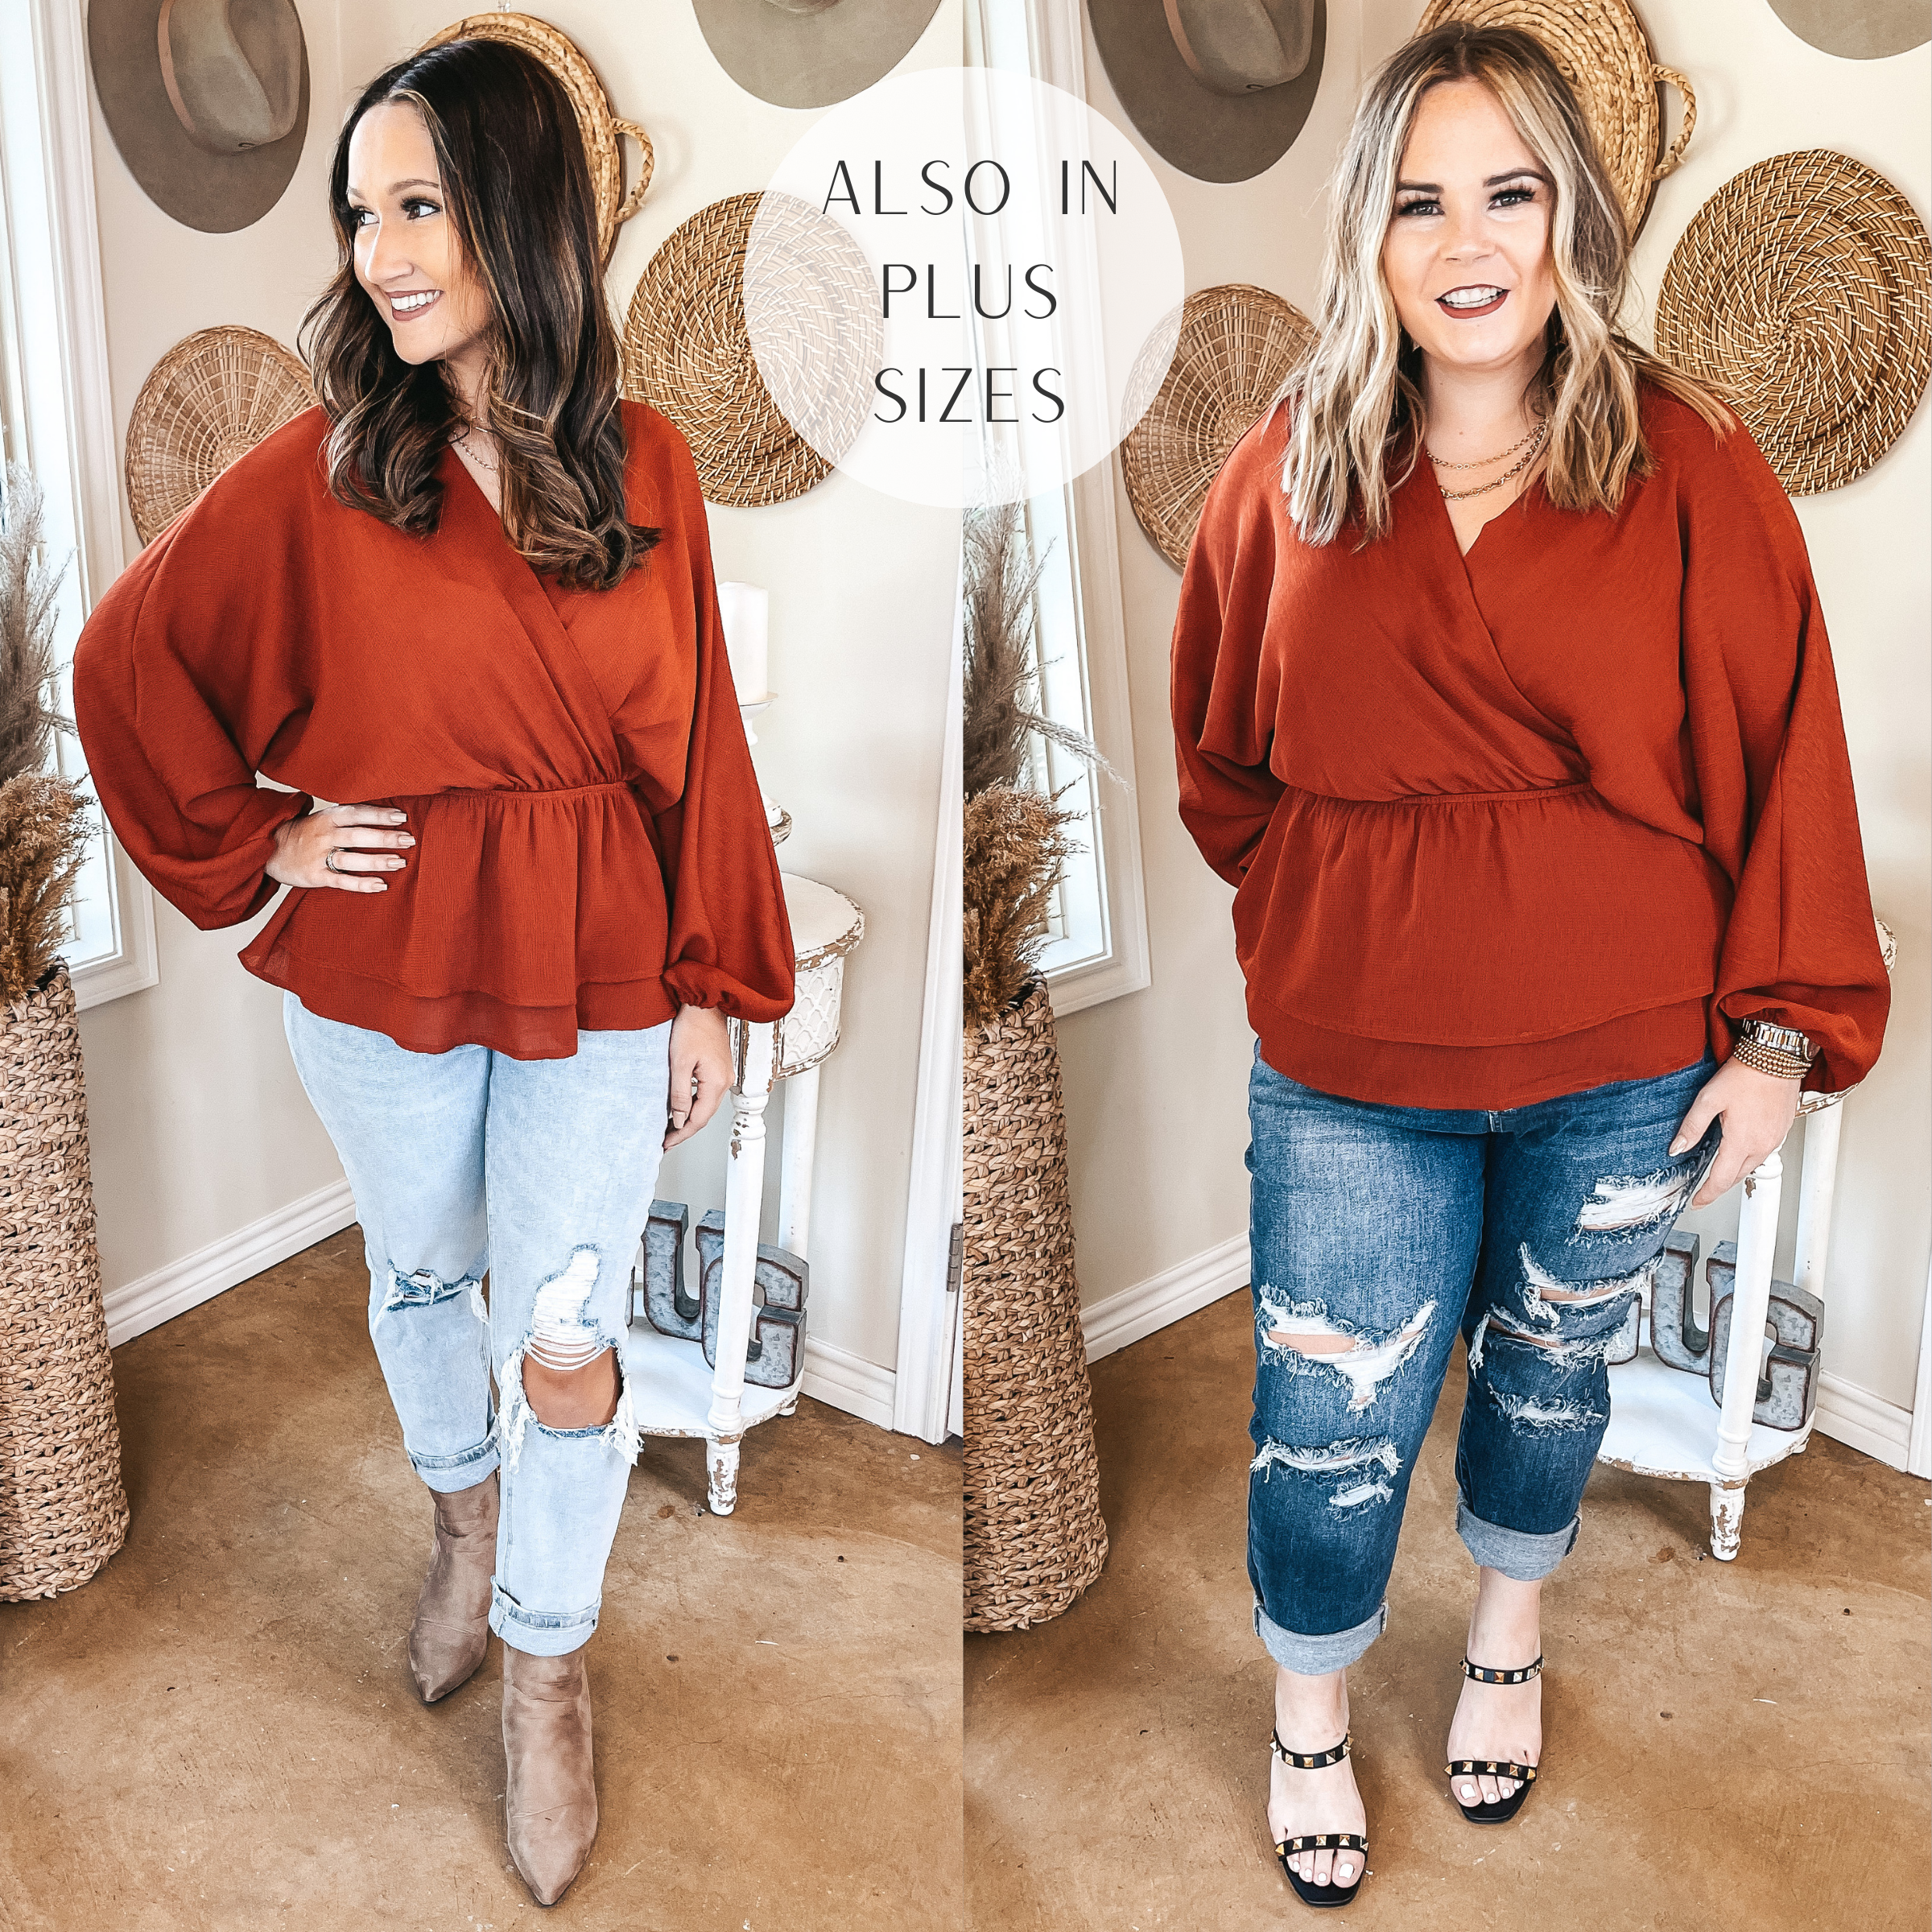 Move to the Music Long Sleeve Deep V Peplum Top in Rust Red - Giddy Up Glamour Boutique